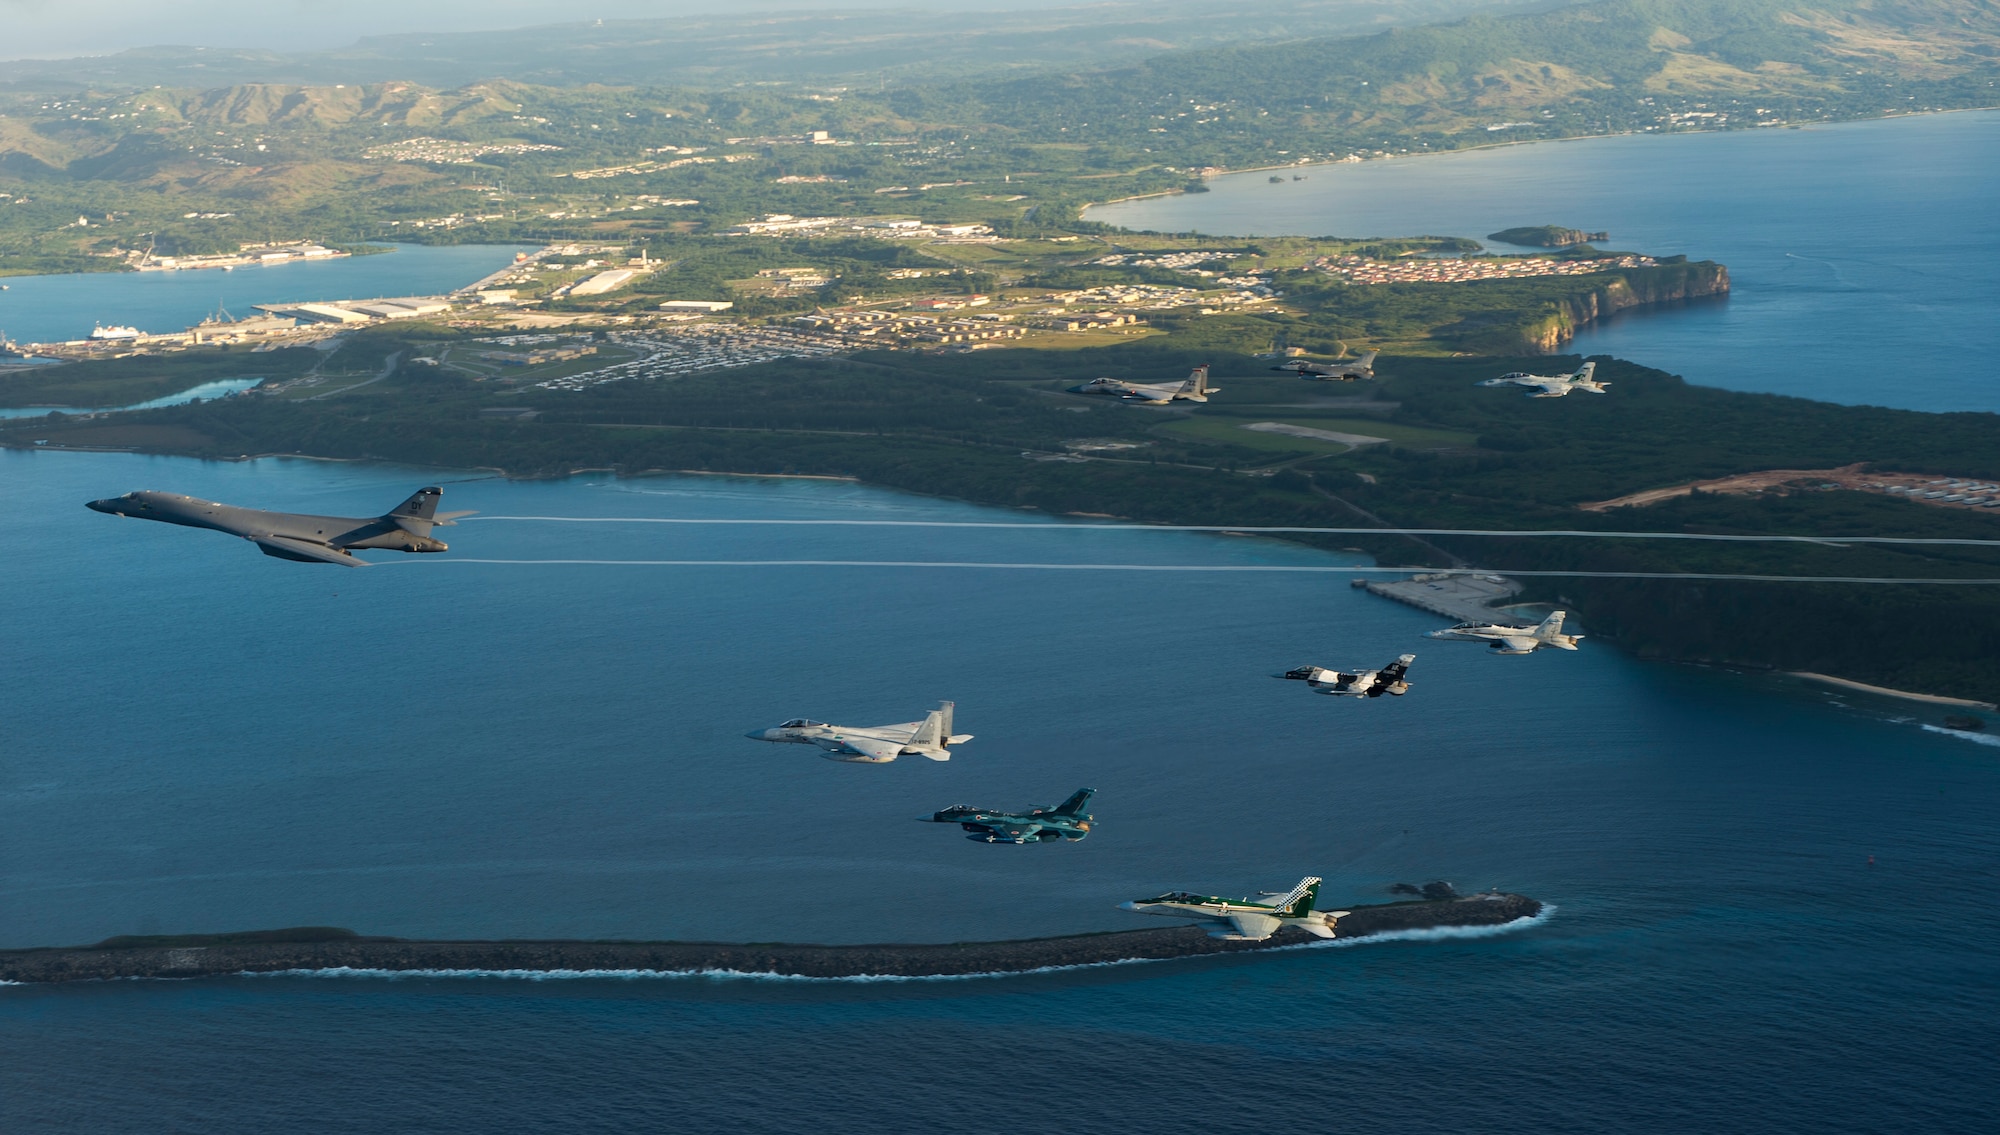 Aircraft from the United States, Japanese and Australian air forces fly in formation during exercise Cope North 2017 off the coast of Guam, Feb. 21, 2017. The exercise includes 22 total flying units and more than 2,700 personnel from three countries and continues the growth of strong, interoperable relationships within the Indo-Asia Pacific Region through integration of airborne and land-based command and control assets. (U.S. Air Force Photo by Staff Sgt. Aaron Richardson)